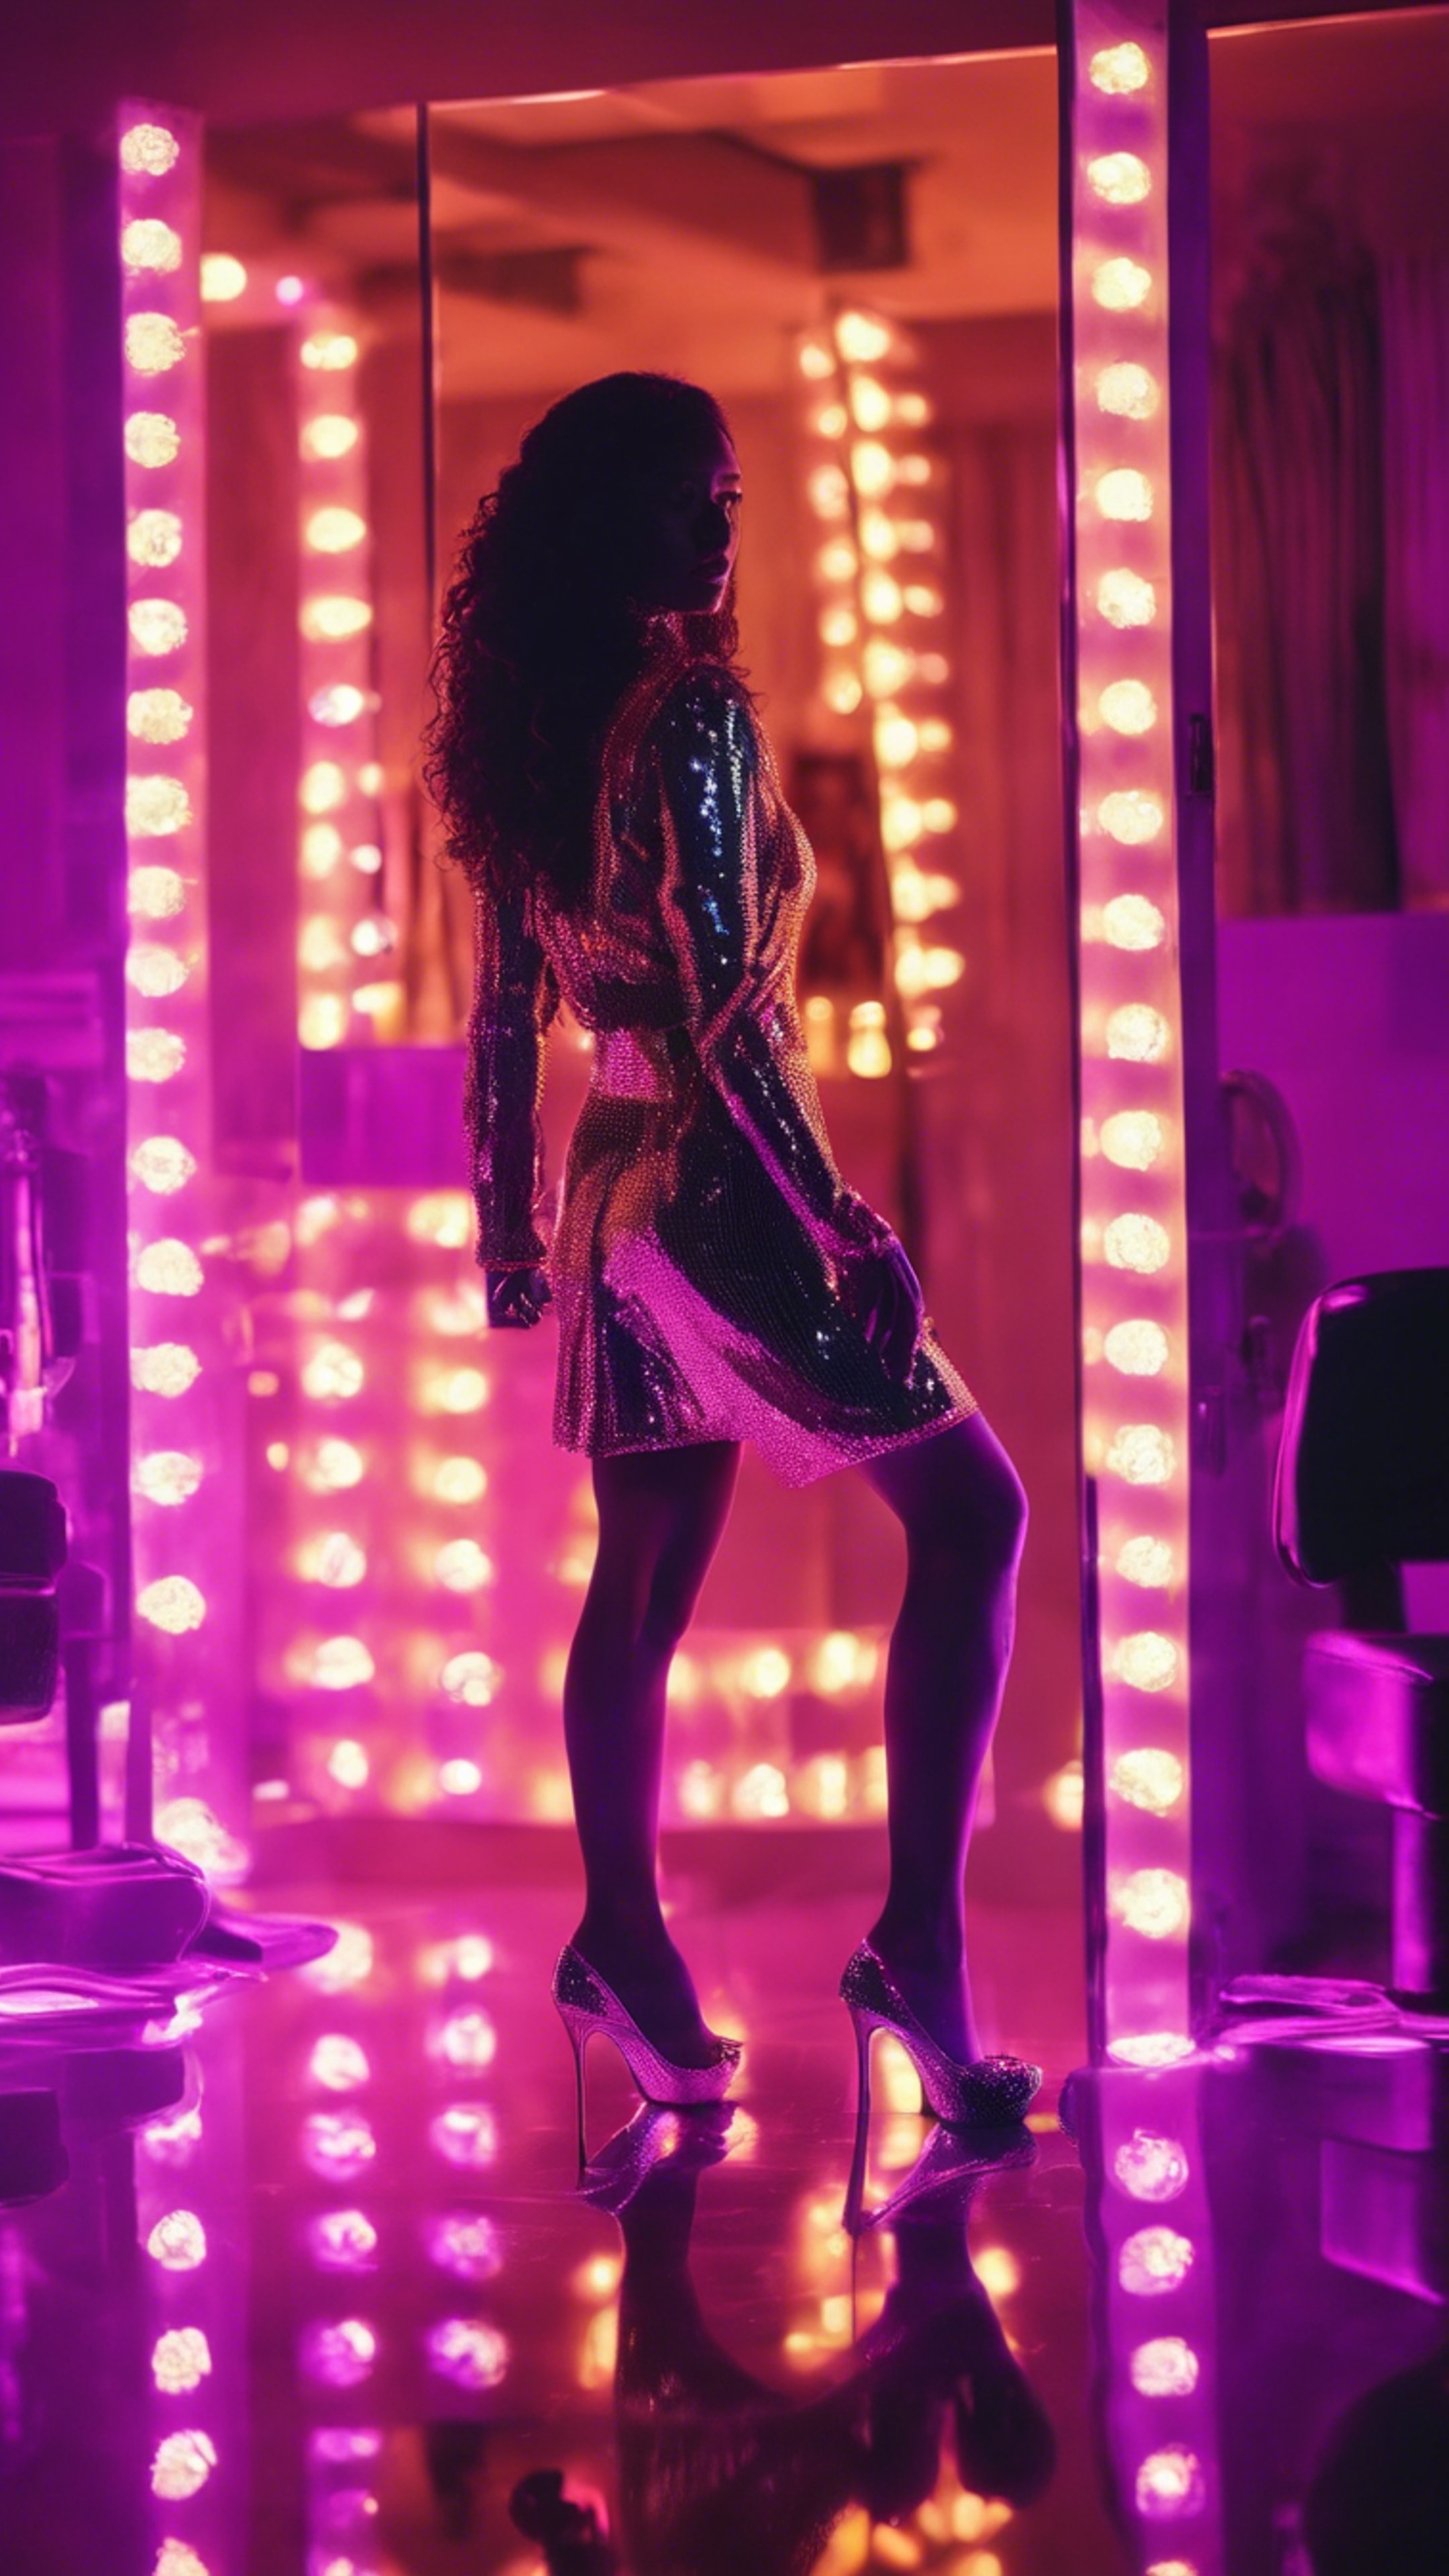 A confident baddie in a neon-lit room, dressed in sequins and high heels, her silhouette reflecting in the mirror. Обои[dd190a8a8fd944b882f7]